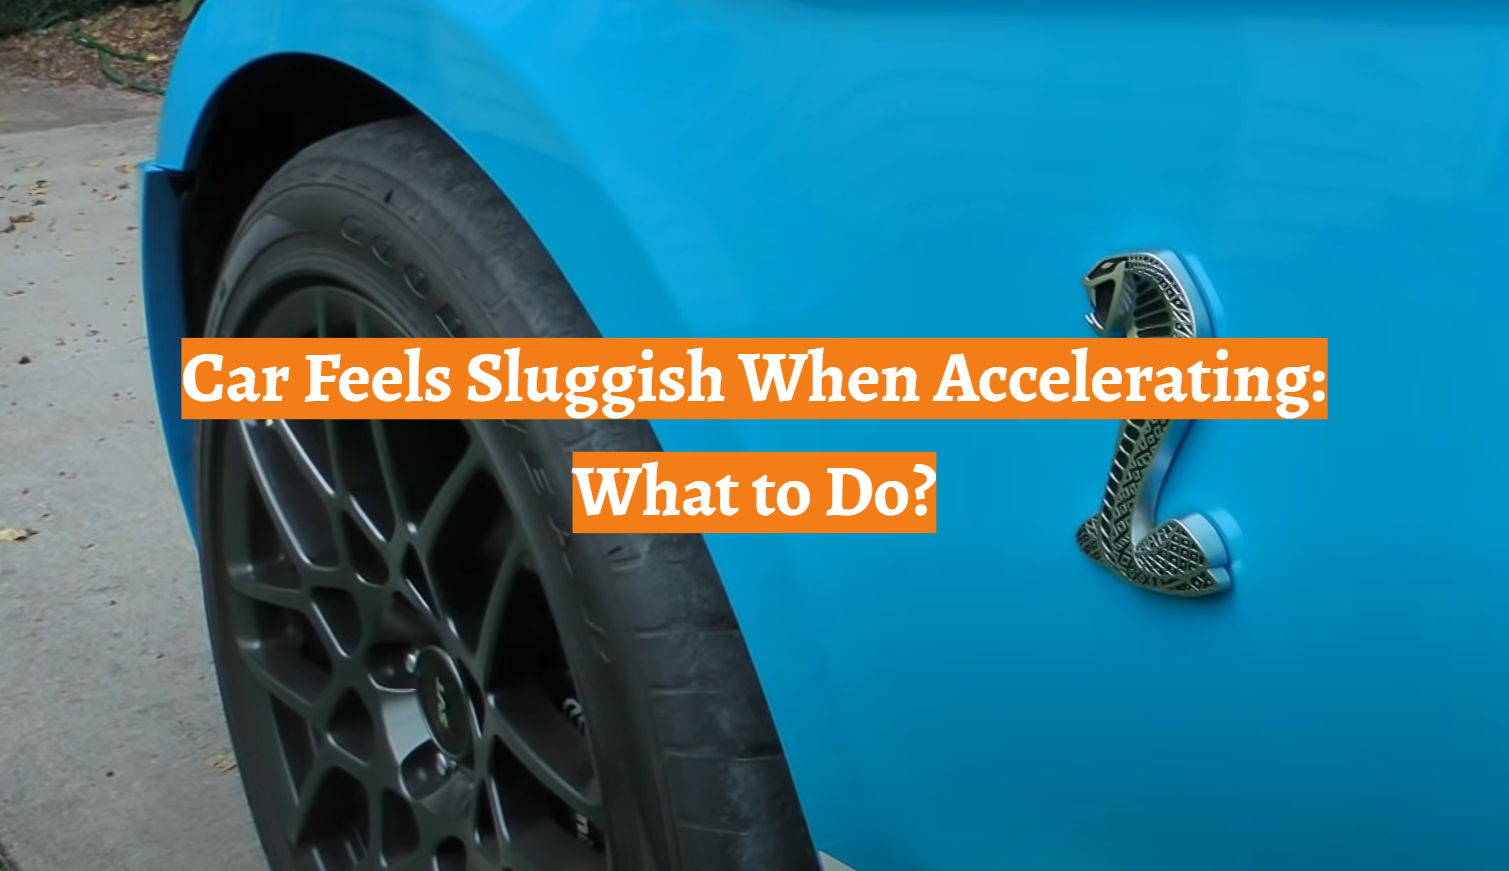 Car Feels Sluggish When Accelerating: What to Do?